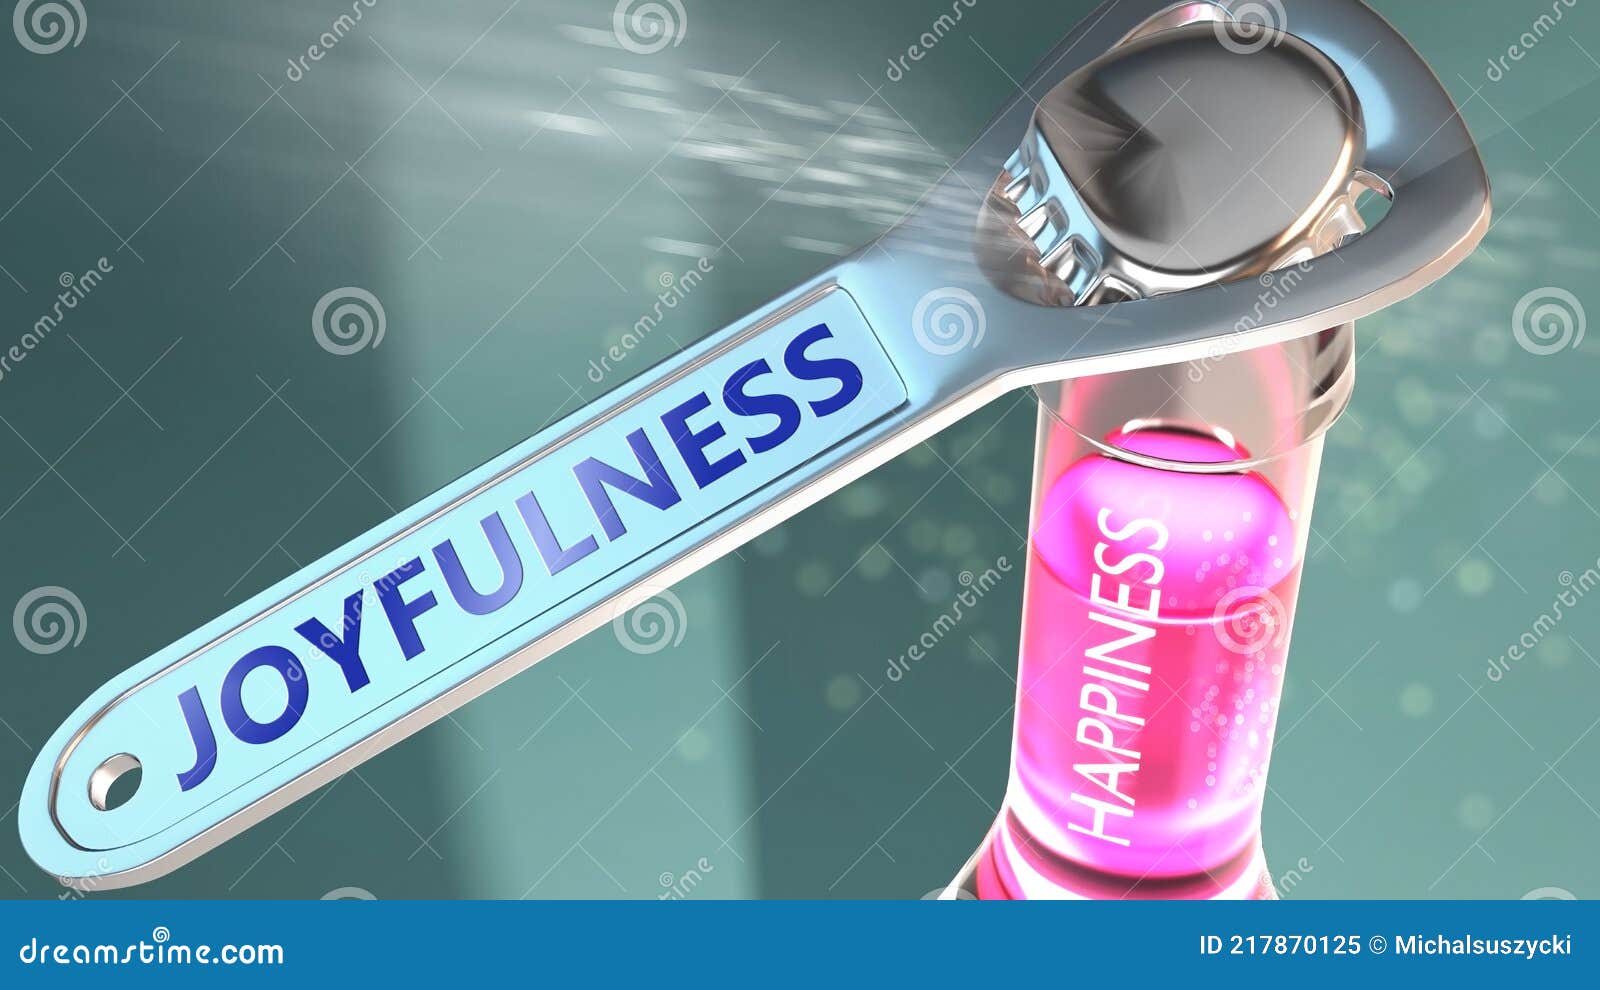 joyfulness open the way for happiness - shown as a happy bottle opened by joyfulness to ize the effect and impact of